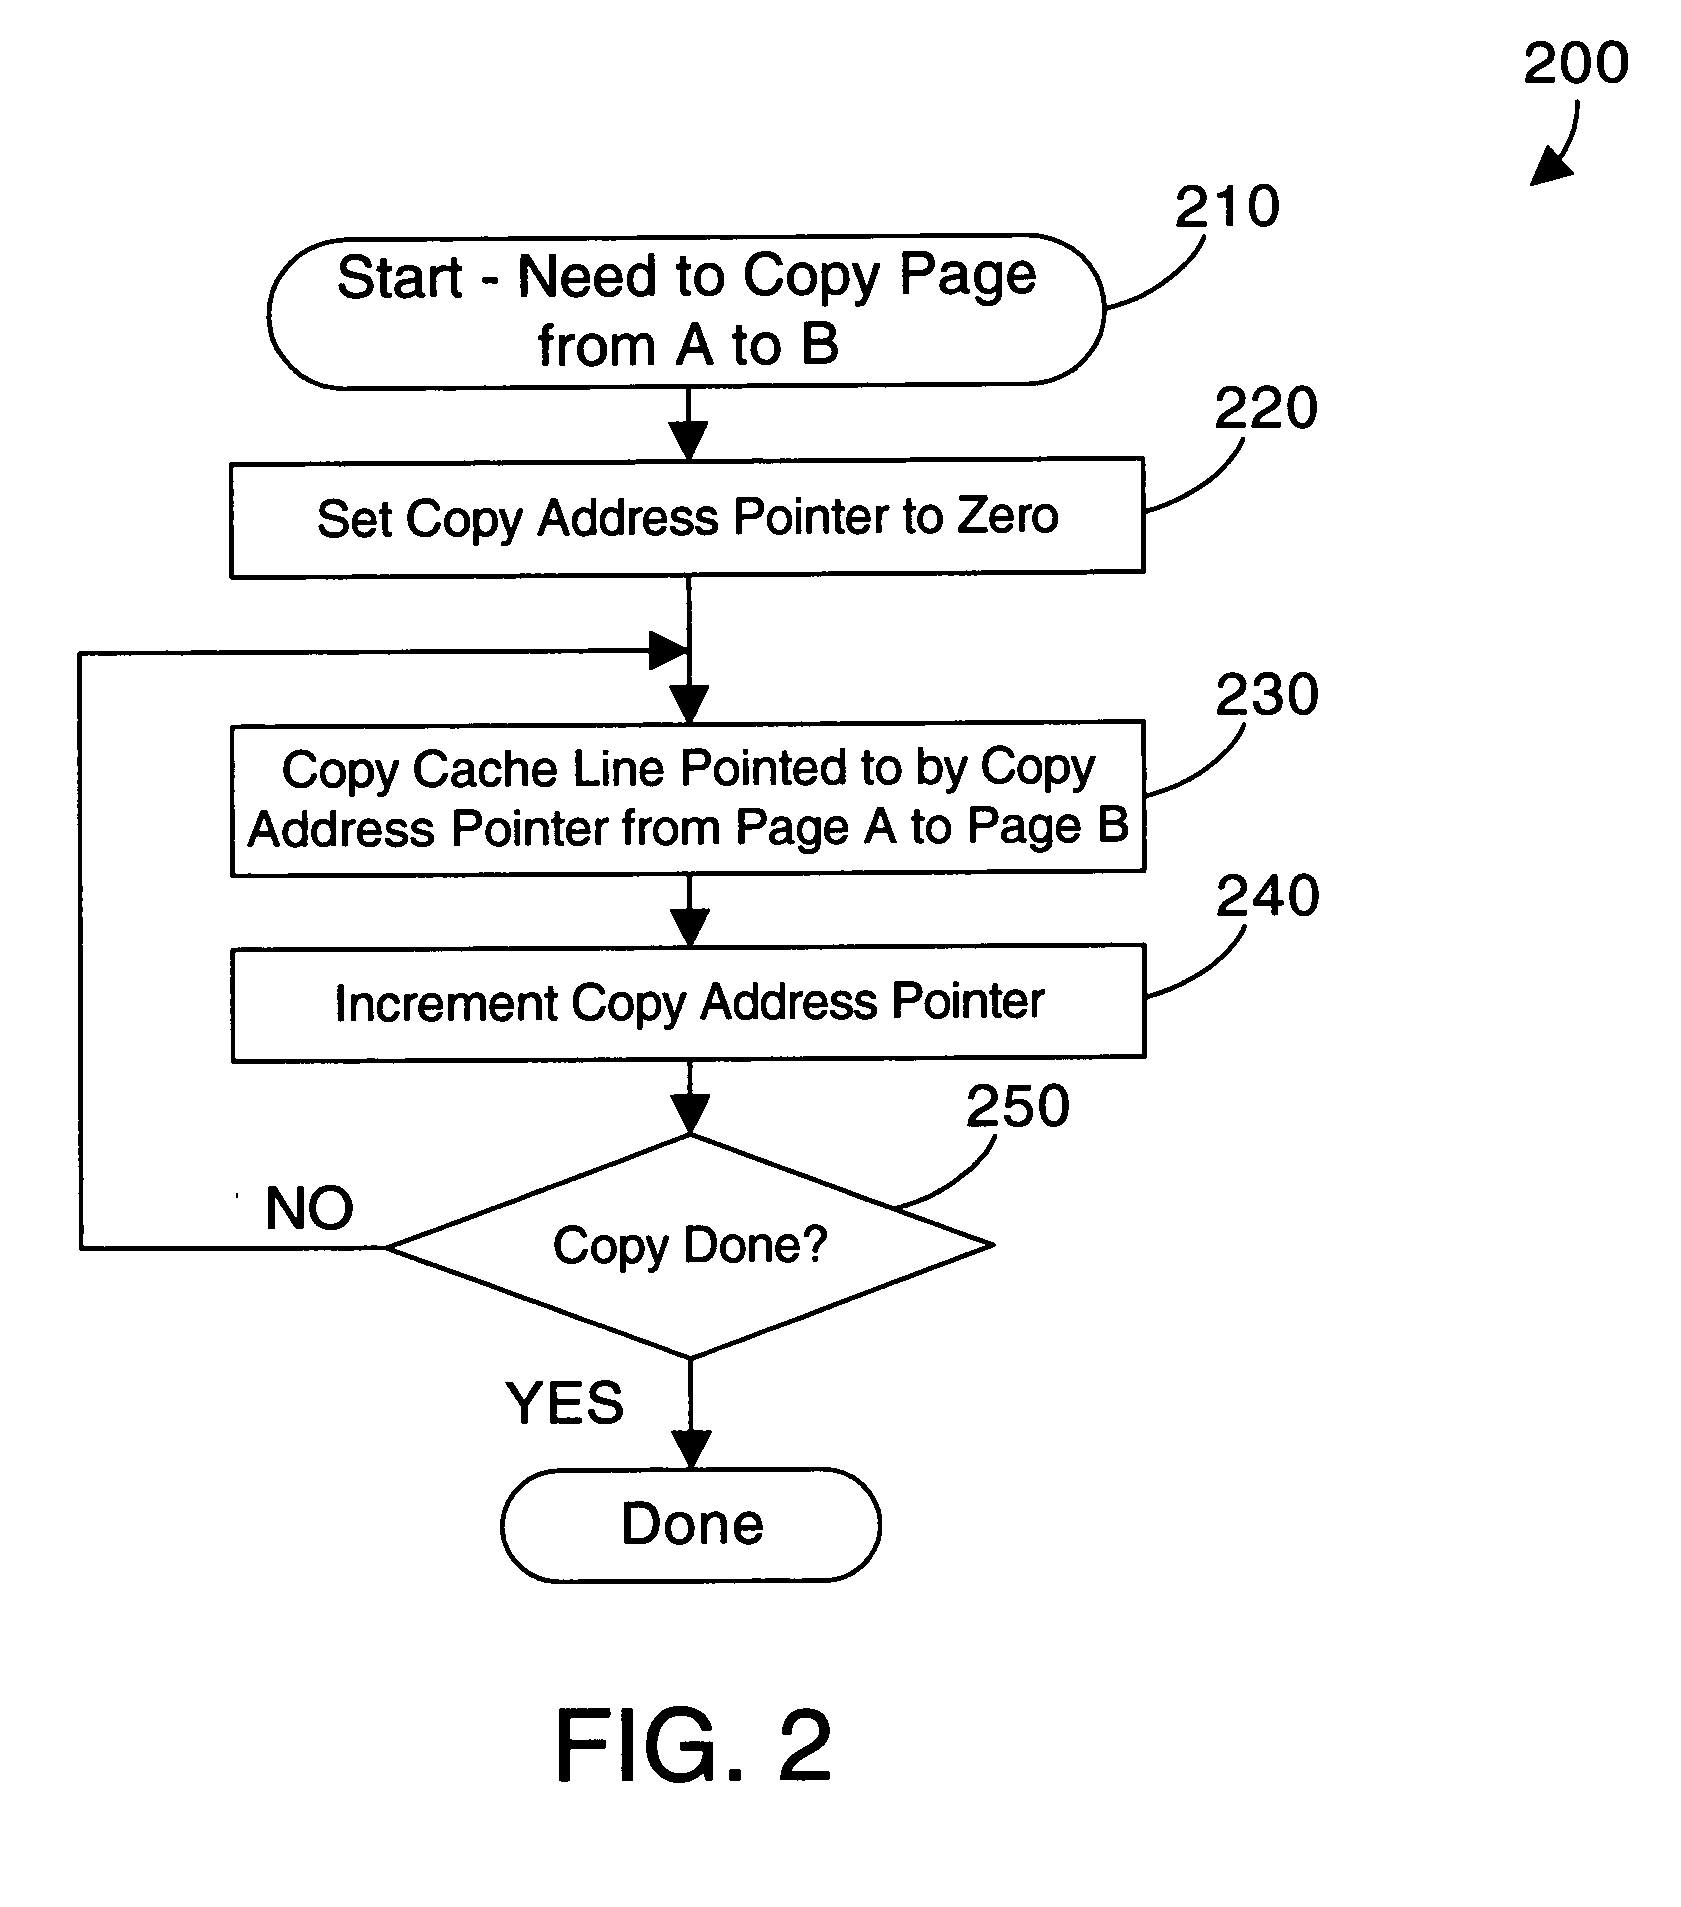 Memory controller and method for handling DMA operations during a page copy